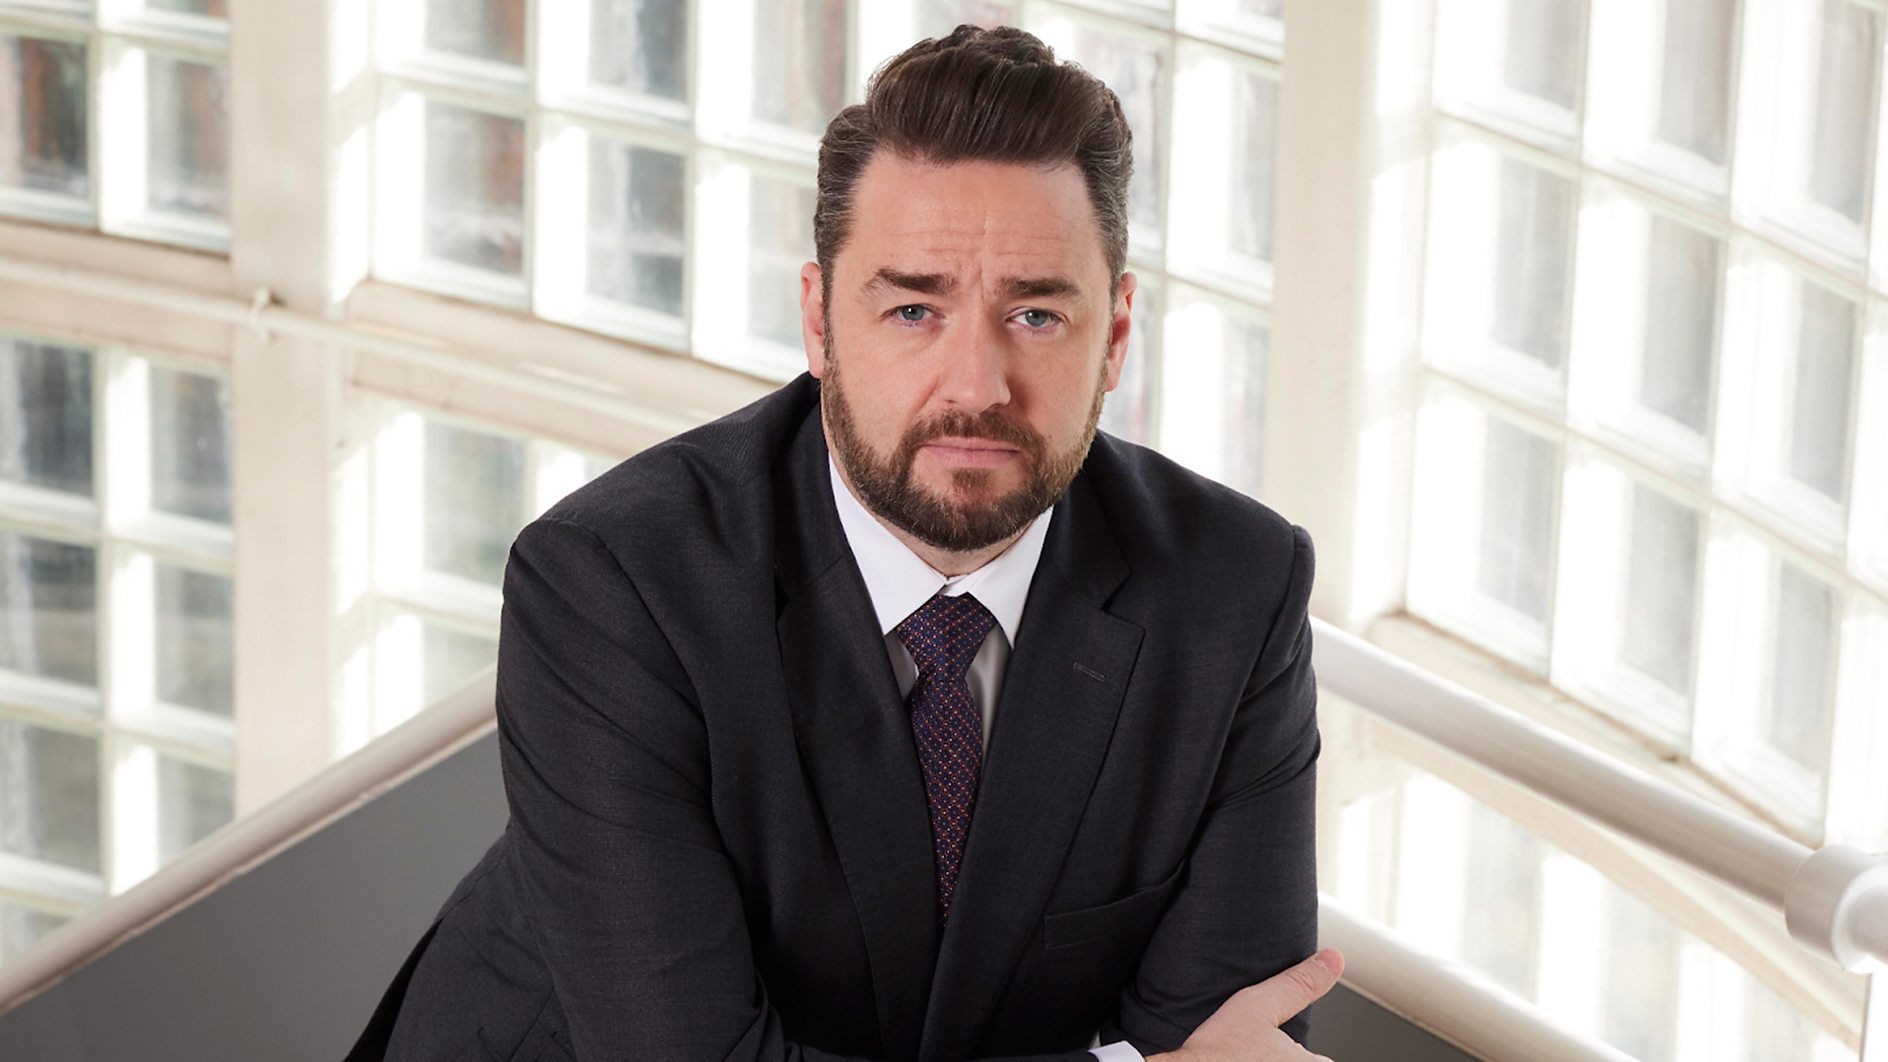 Jason Manford to join cast of BBC’s Waterloo Road as new Headteacher Mr Savage